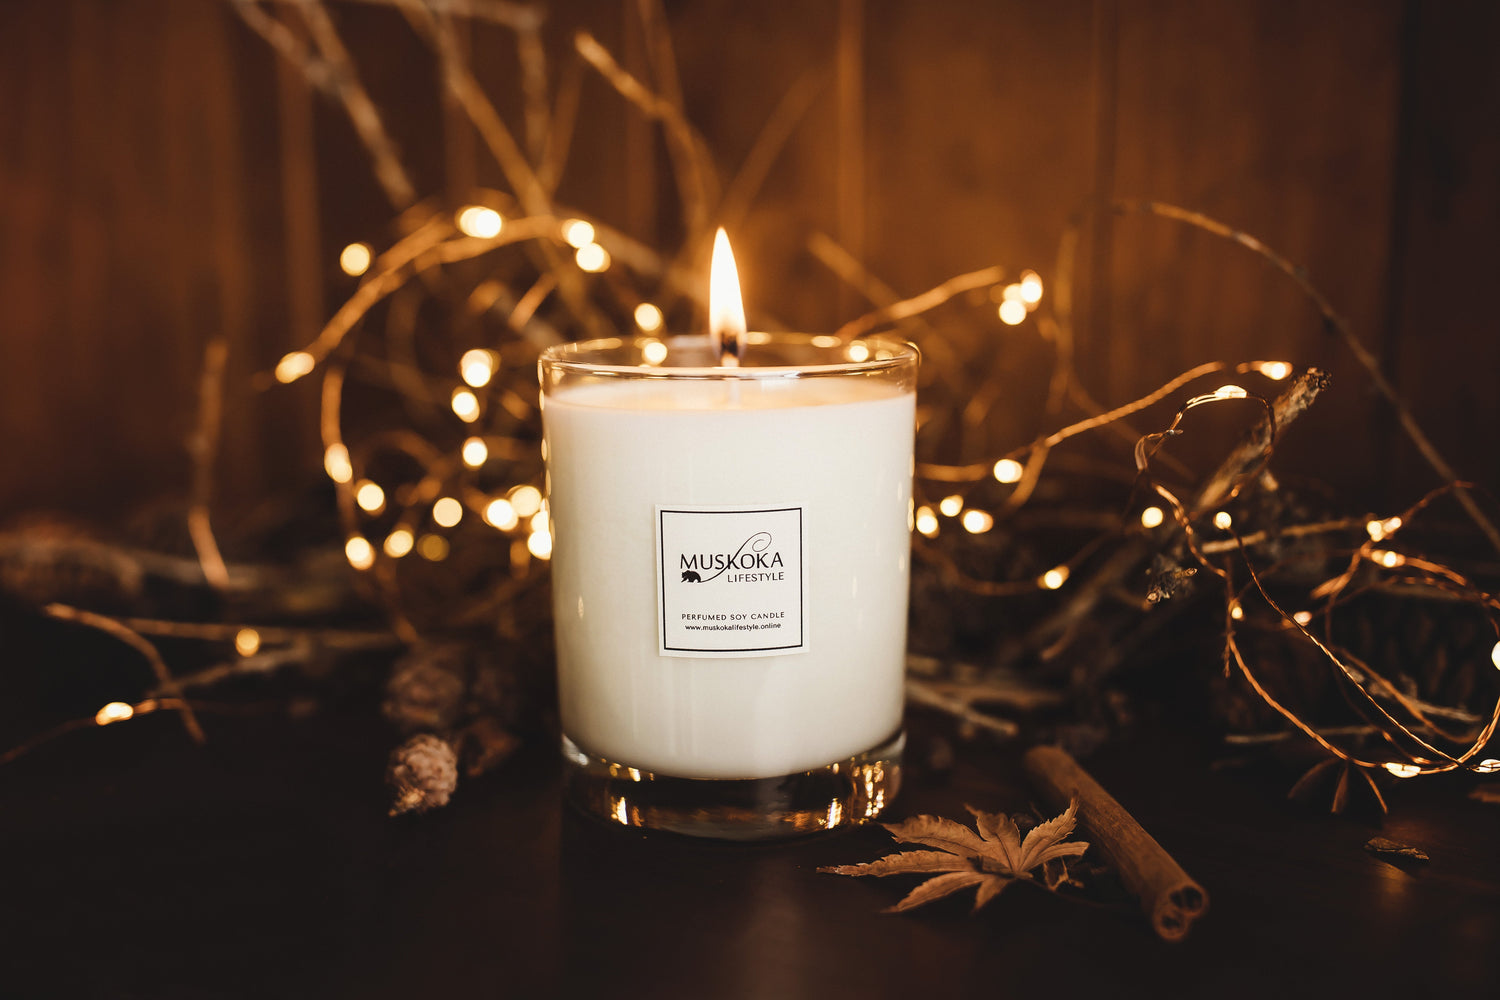 The Muskoka Lifestyle Whiskey, Woodsmoke & Leather Candle is one of our most loved fragrances, this masculine yet sweet-smelling candle is adored by many and is often a sell-out! This is the large size with a burn time of more than 70 hours.